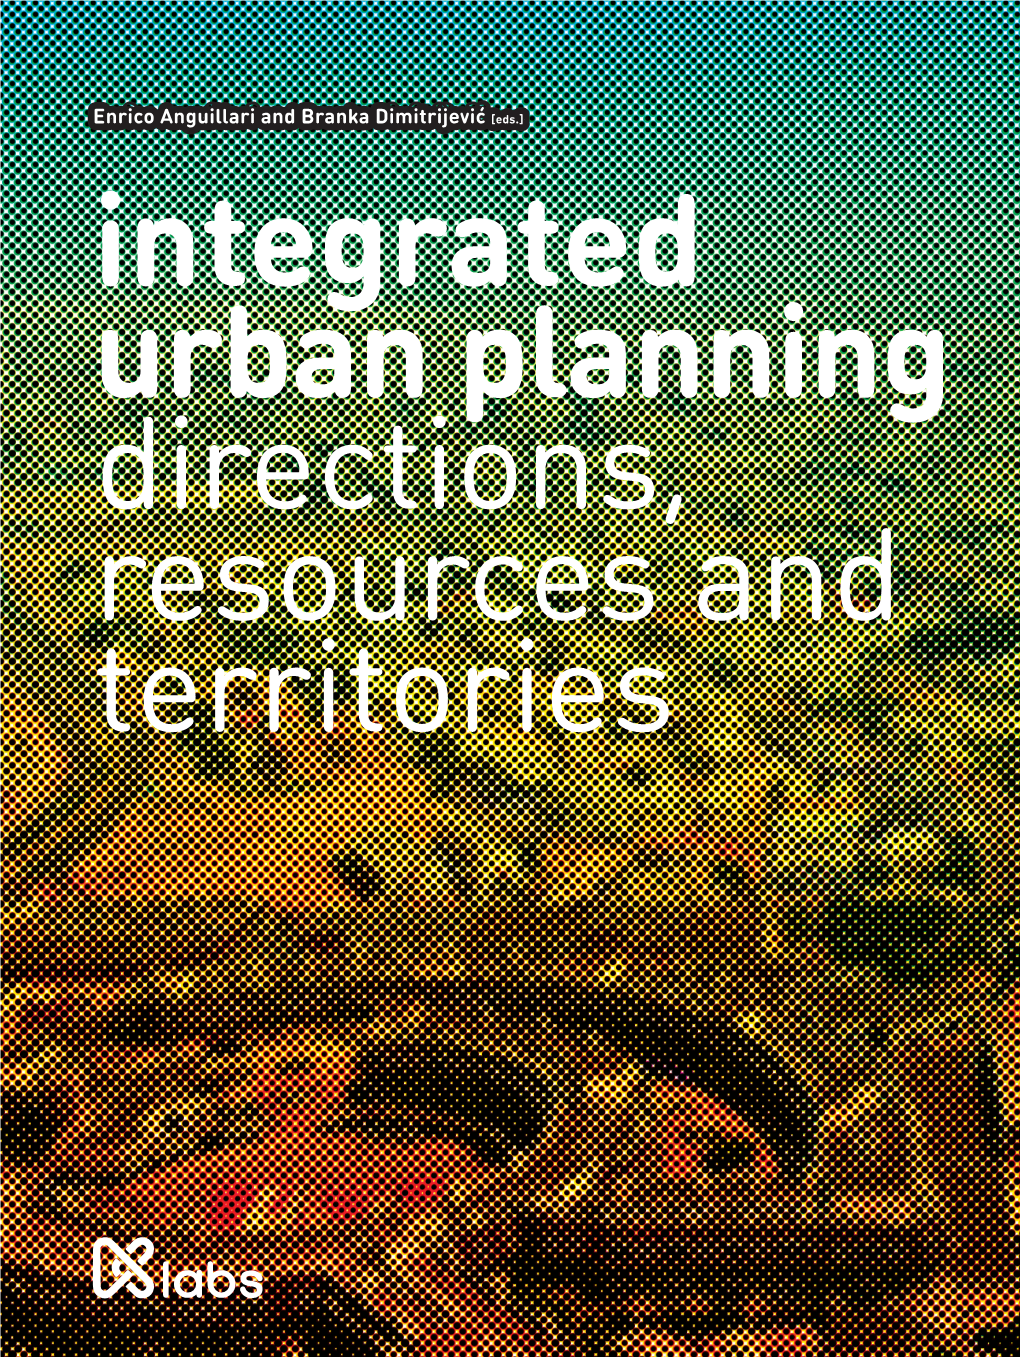 Integrated Urban Planning Directions, Resources and Territories